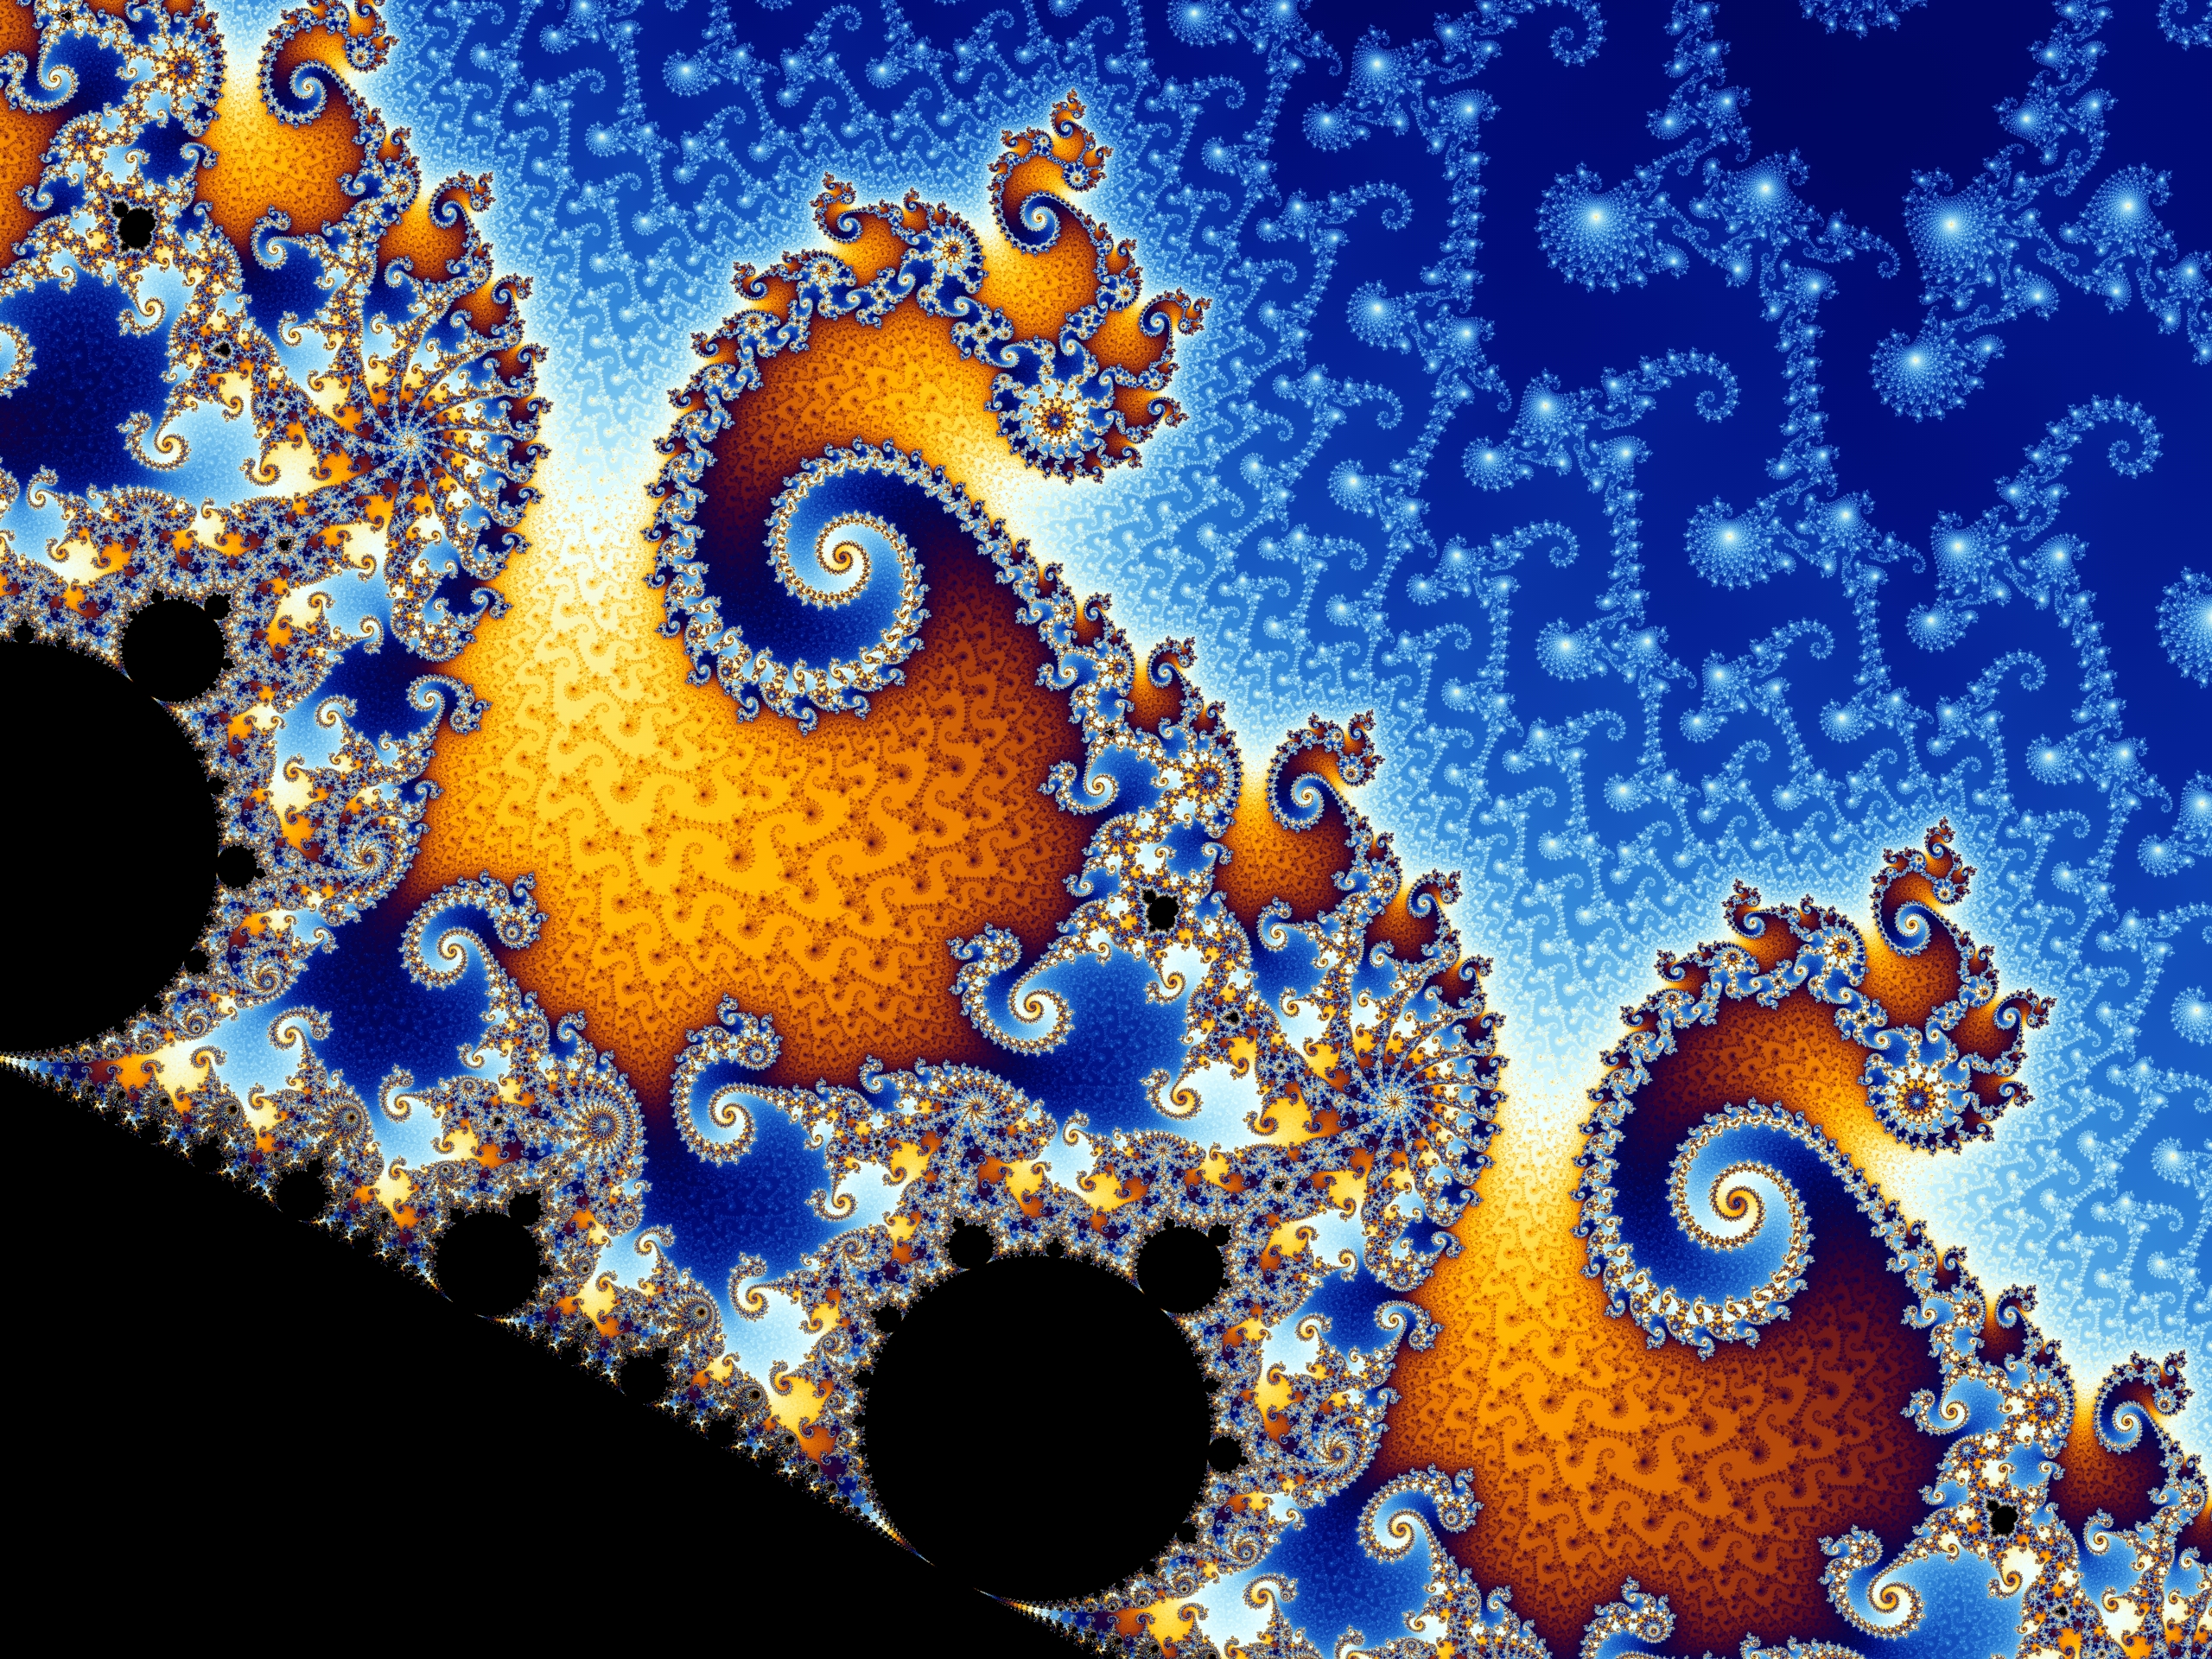 From Britain's coast to Julia set: an introduction to fractals ...